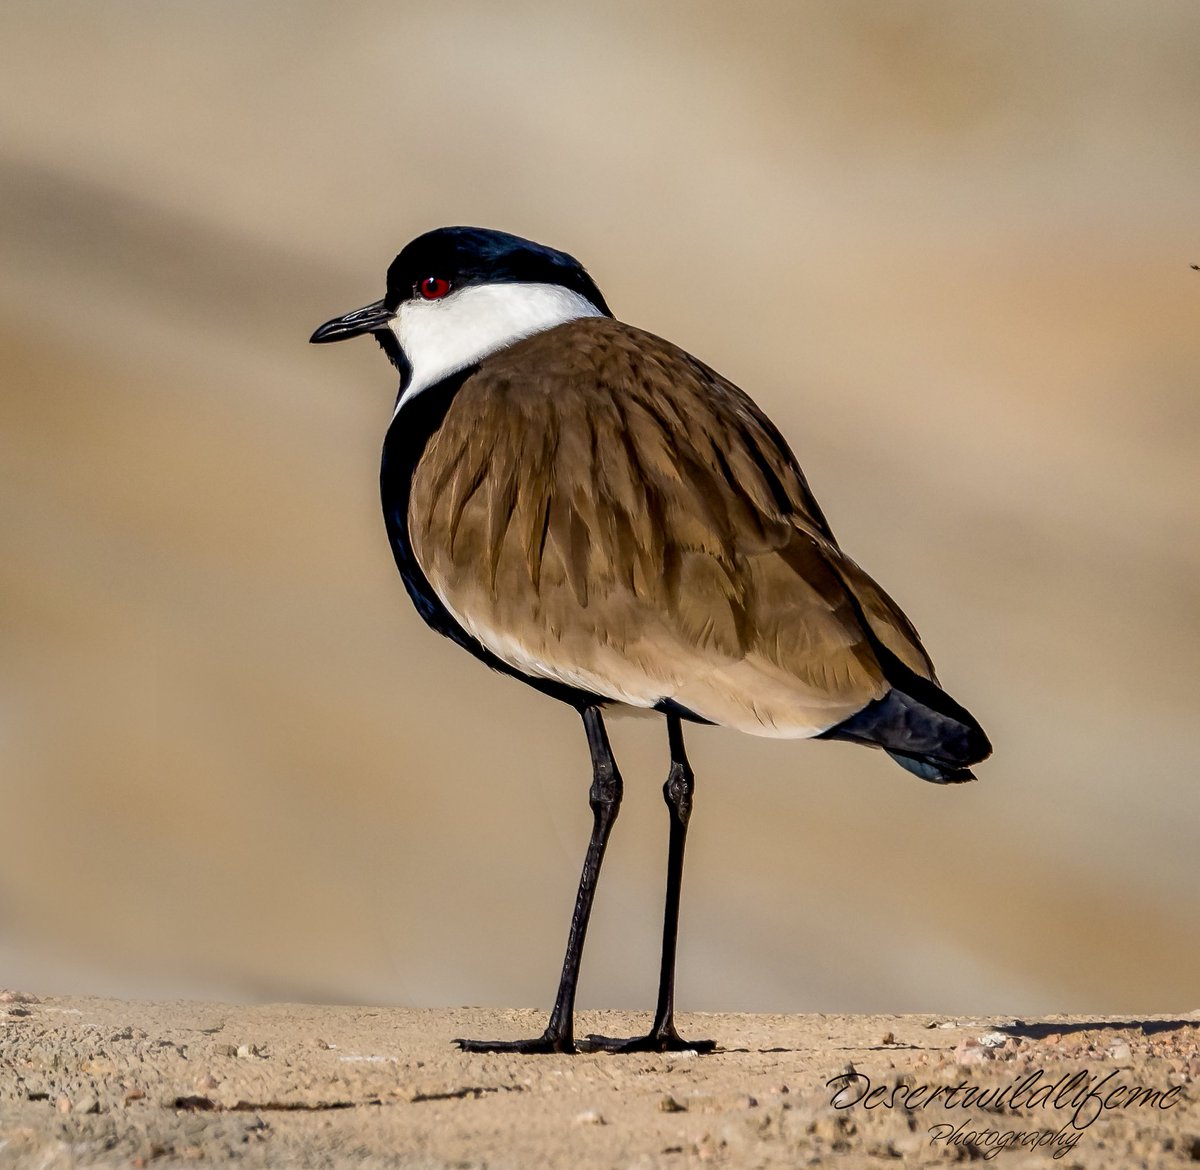 Spur-winged Lapwing pic taken at Aqaba Bird Observatory Aqaba, Jordan #aqababirdobservatory @aqababirdobservatory #canonbirdphotography